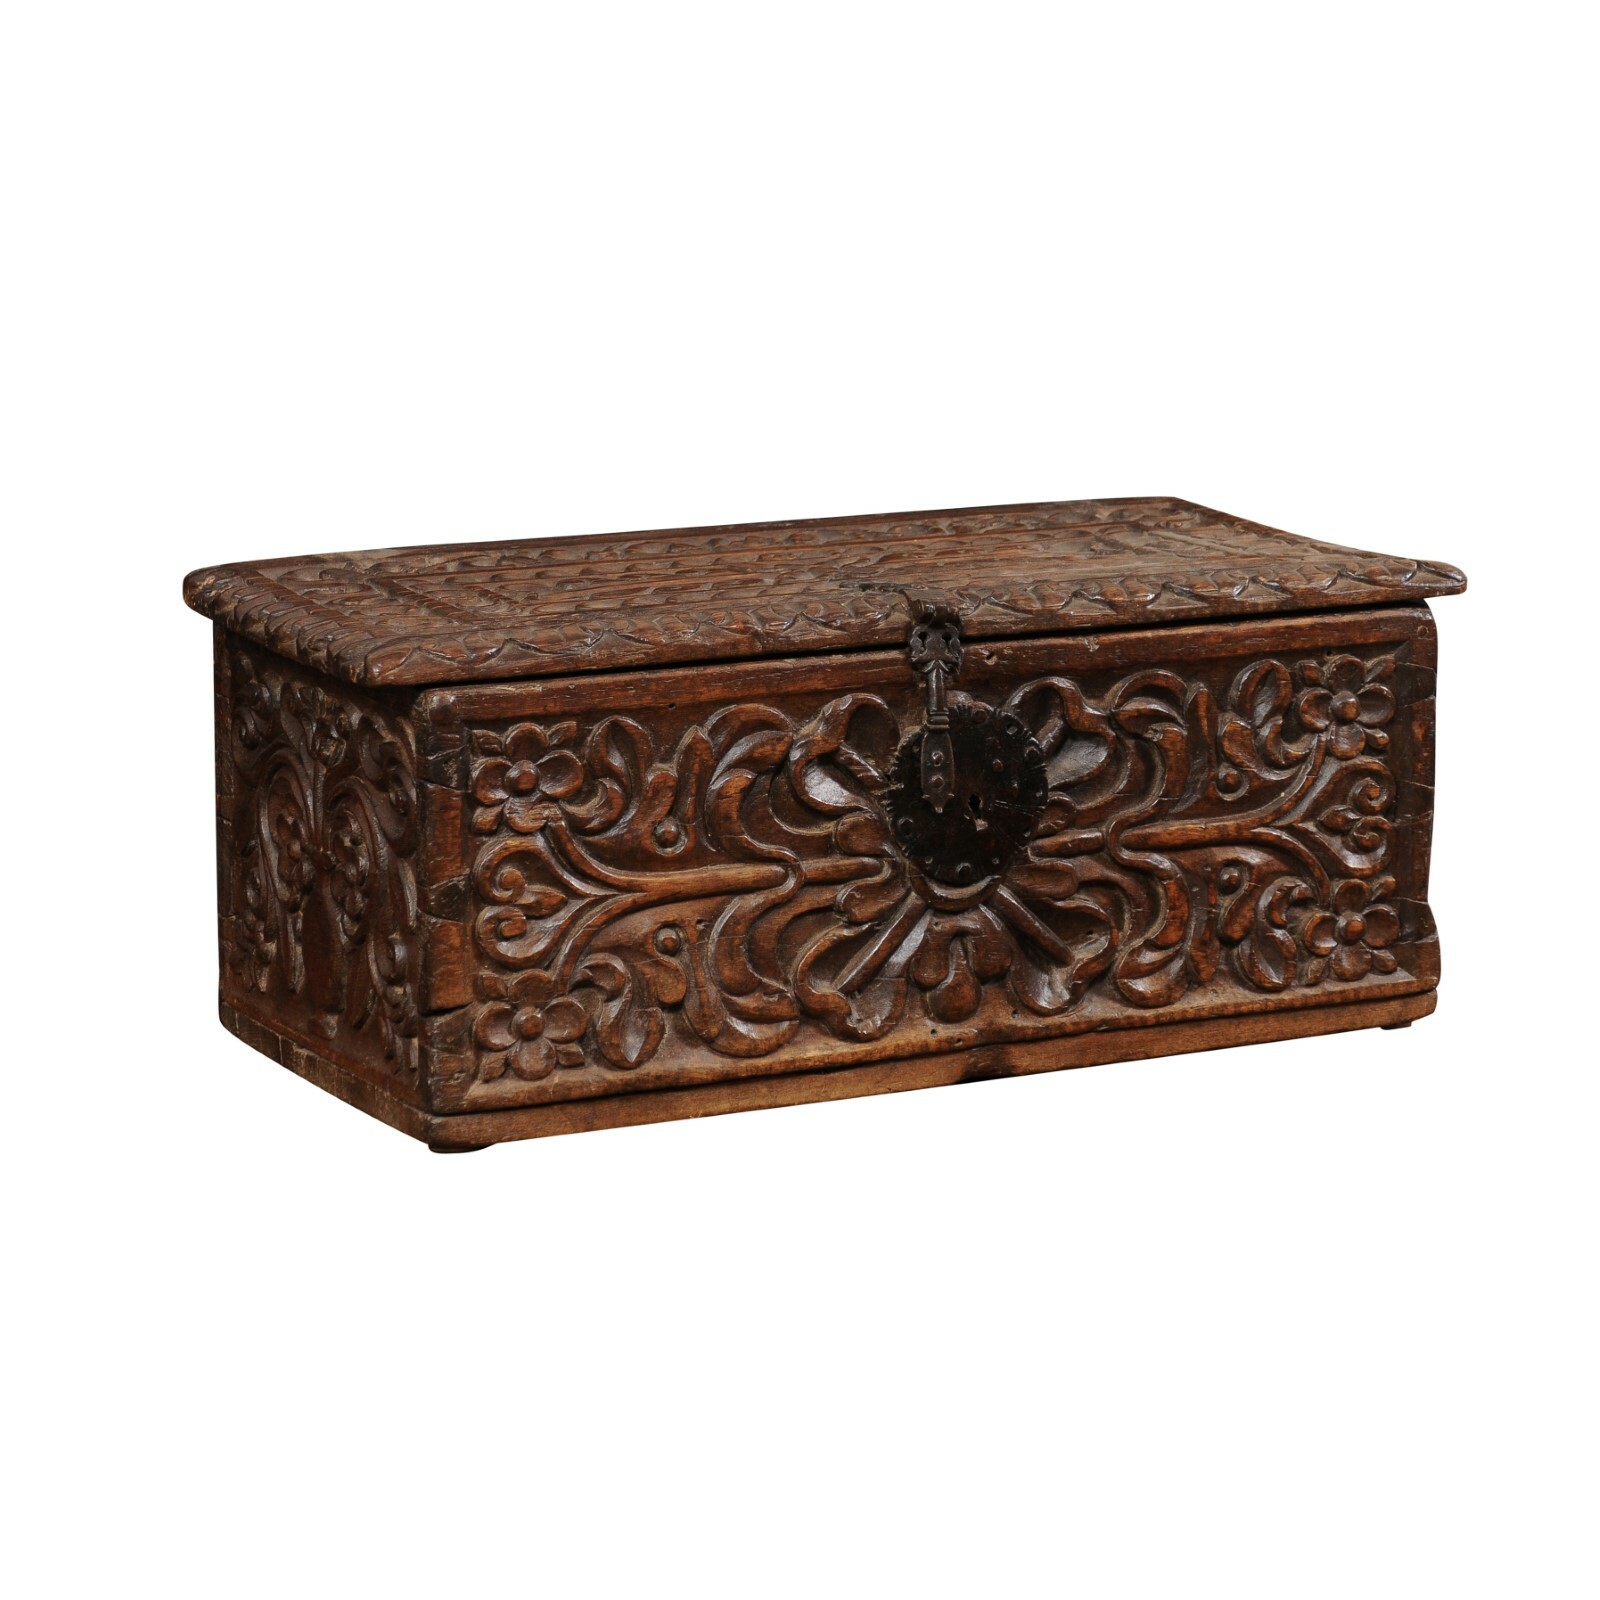 18th C. Spanish Colonial Carved-Wood Trunk